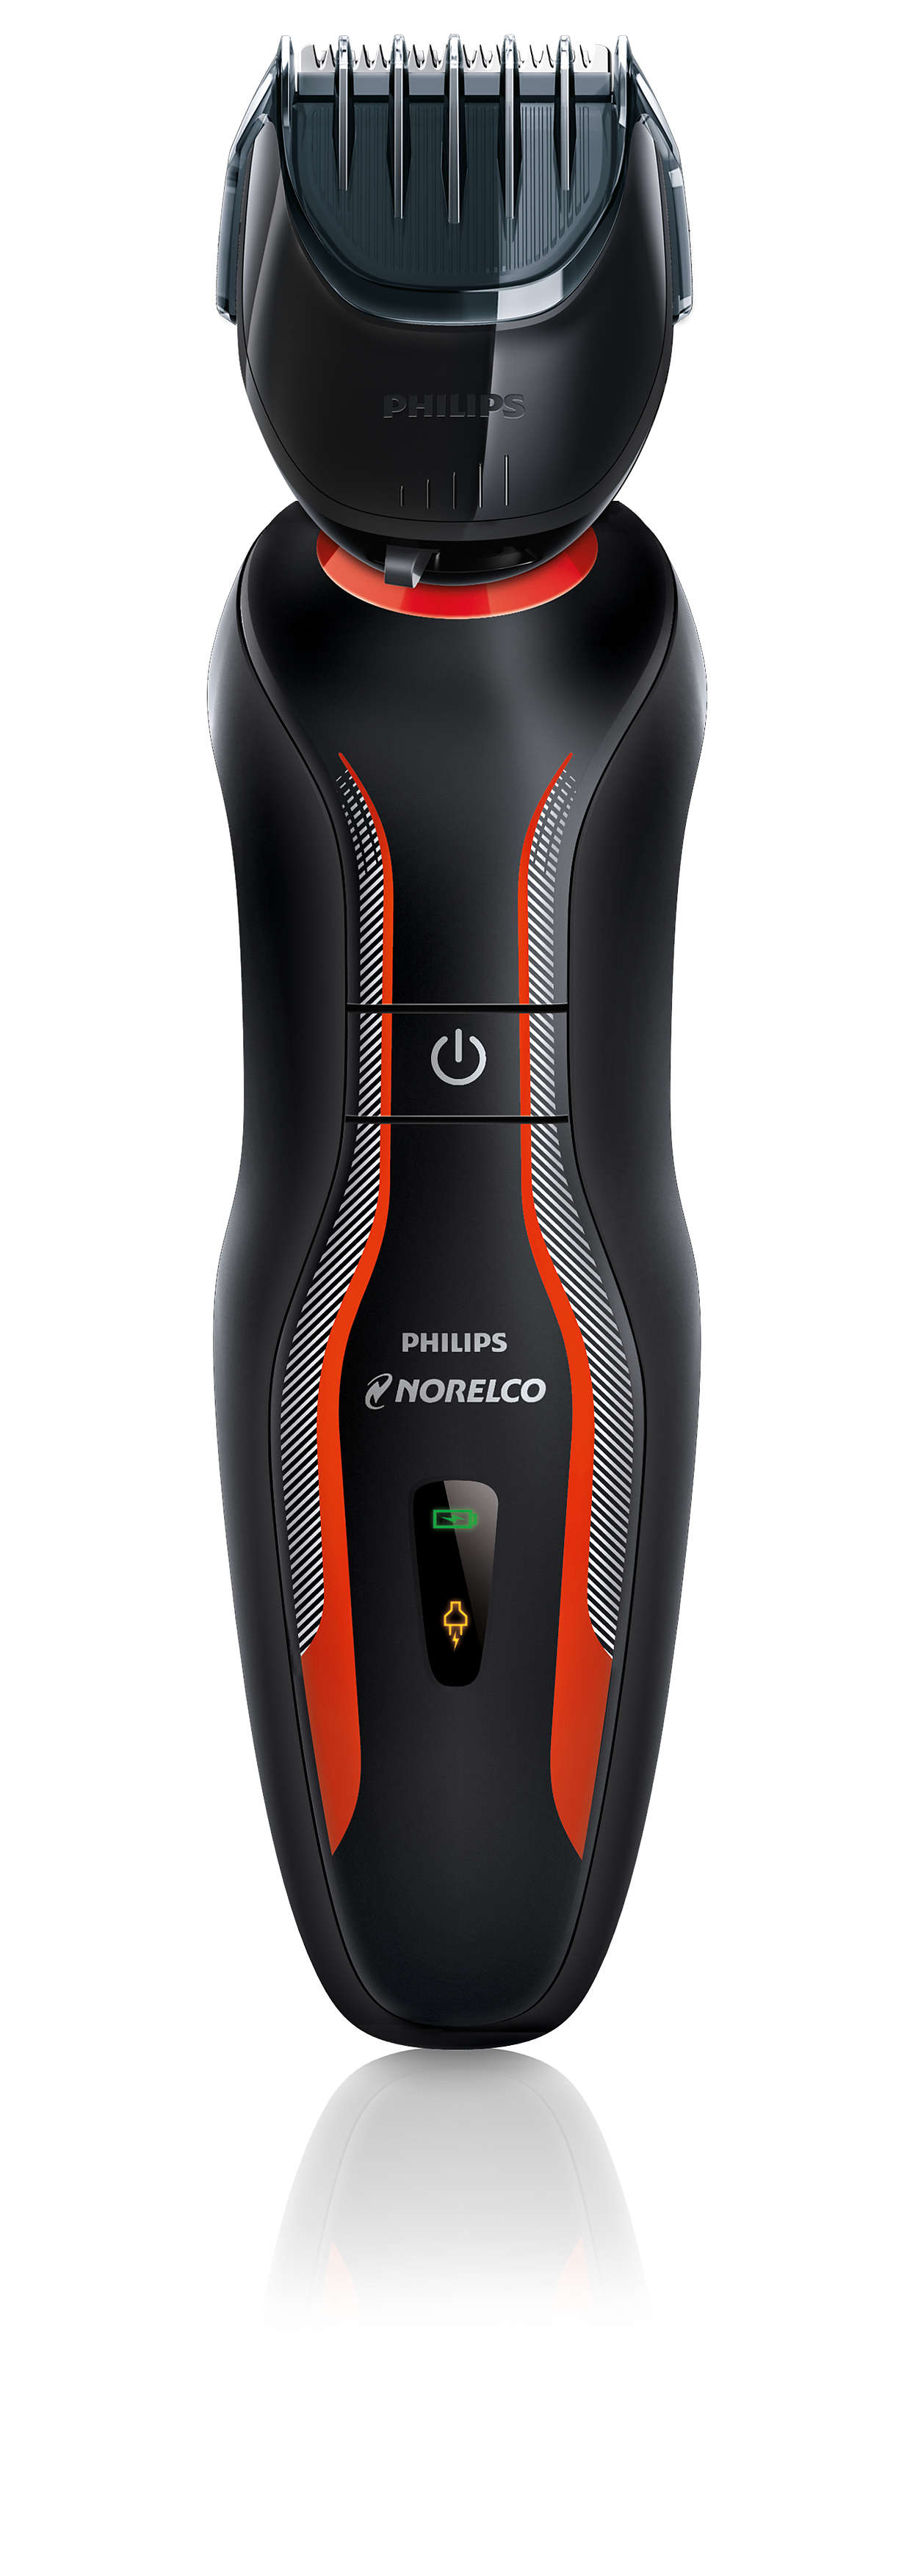 Philips Norelco shave, groom & style